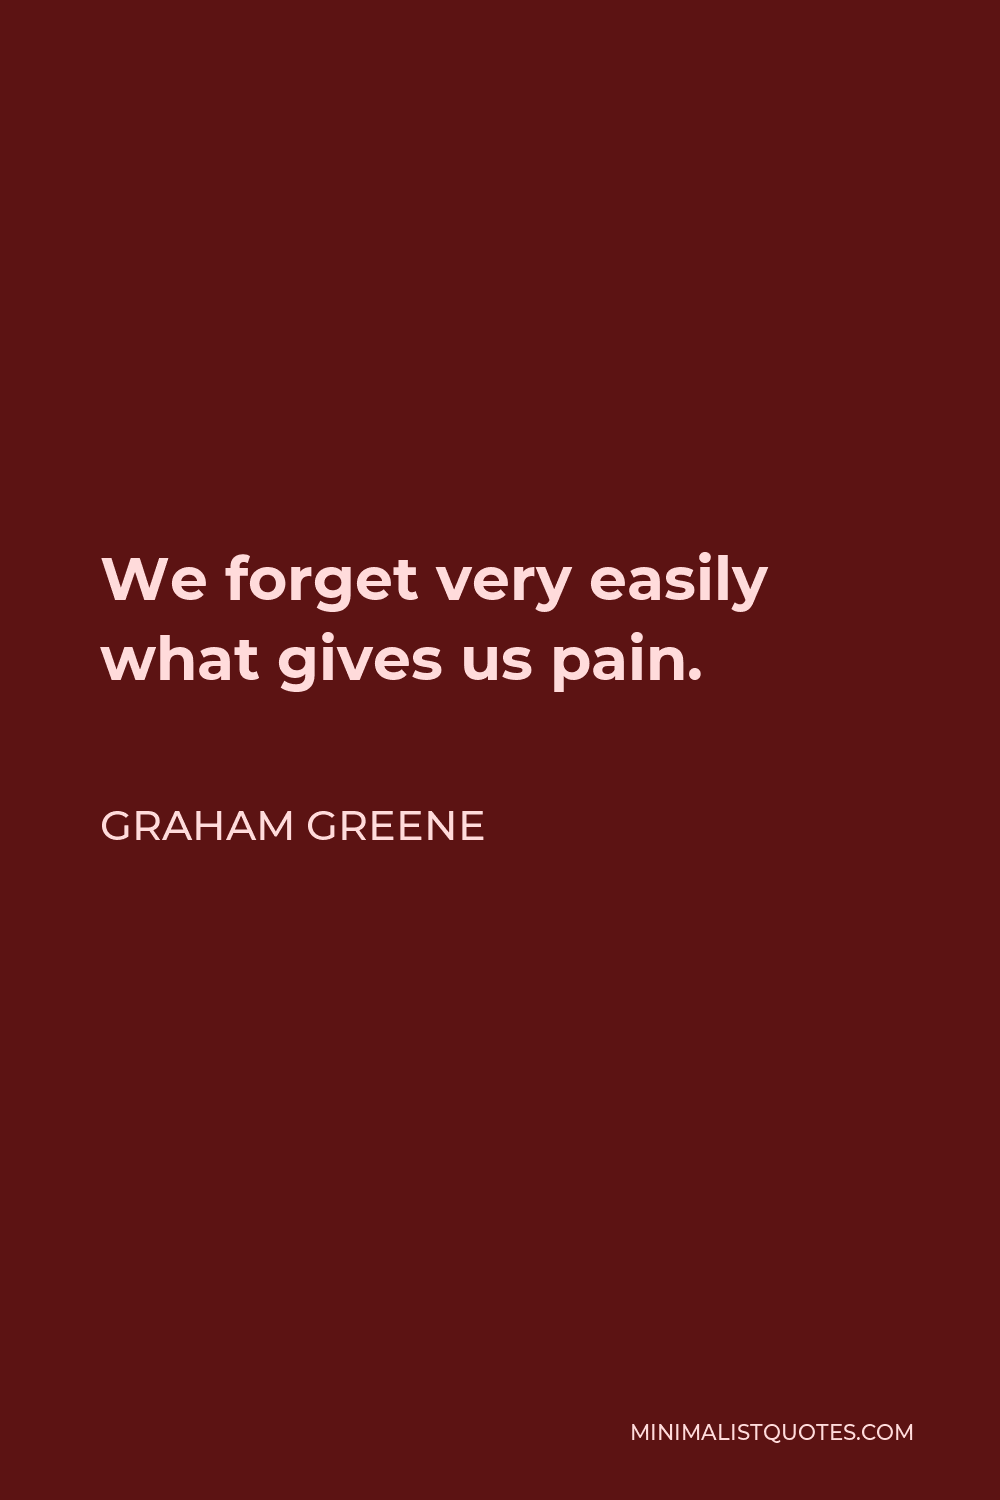 Graham Greene Quote - We forget very easily what gives us pain.